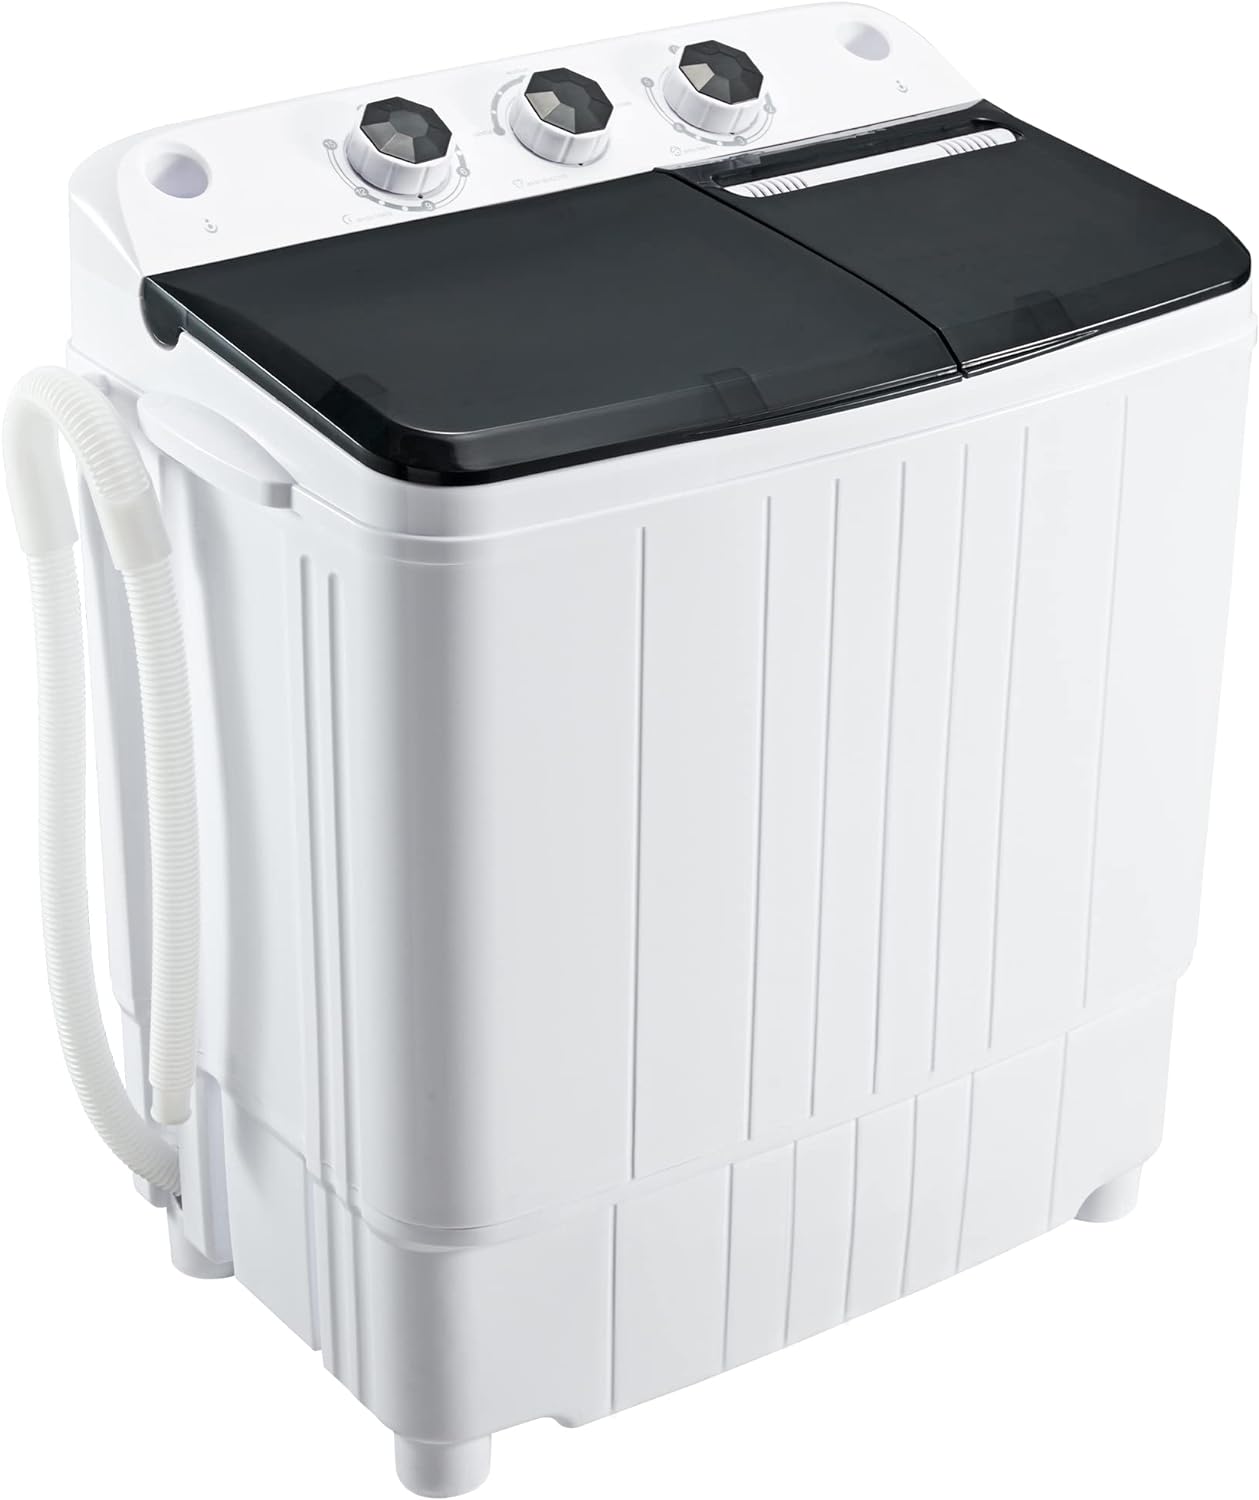 Homguava Portable Washer Machine 17.6LBS Capacity Mini Washing Machine 2 in 1 Compact Washer and Dryer Combo Twin Tub Laundry Washer(11LBS) & Spinner (6.6LBS) with Built-In Gravity Drain Pump(BLACK)